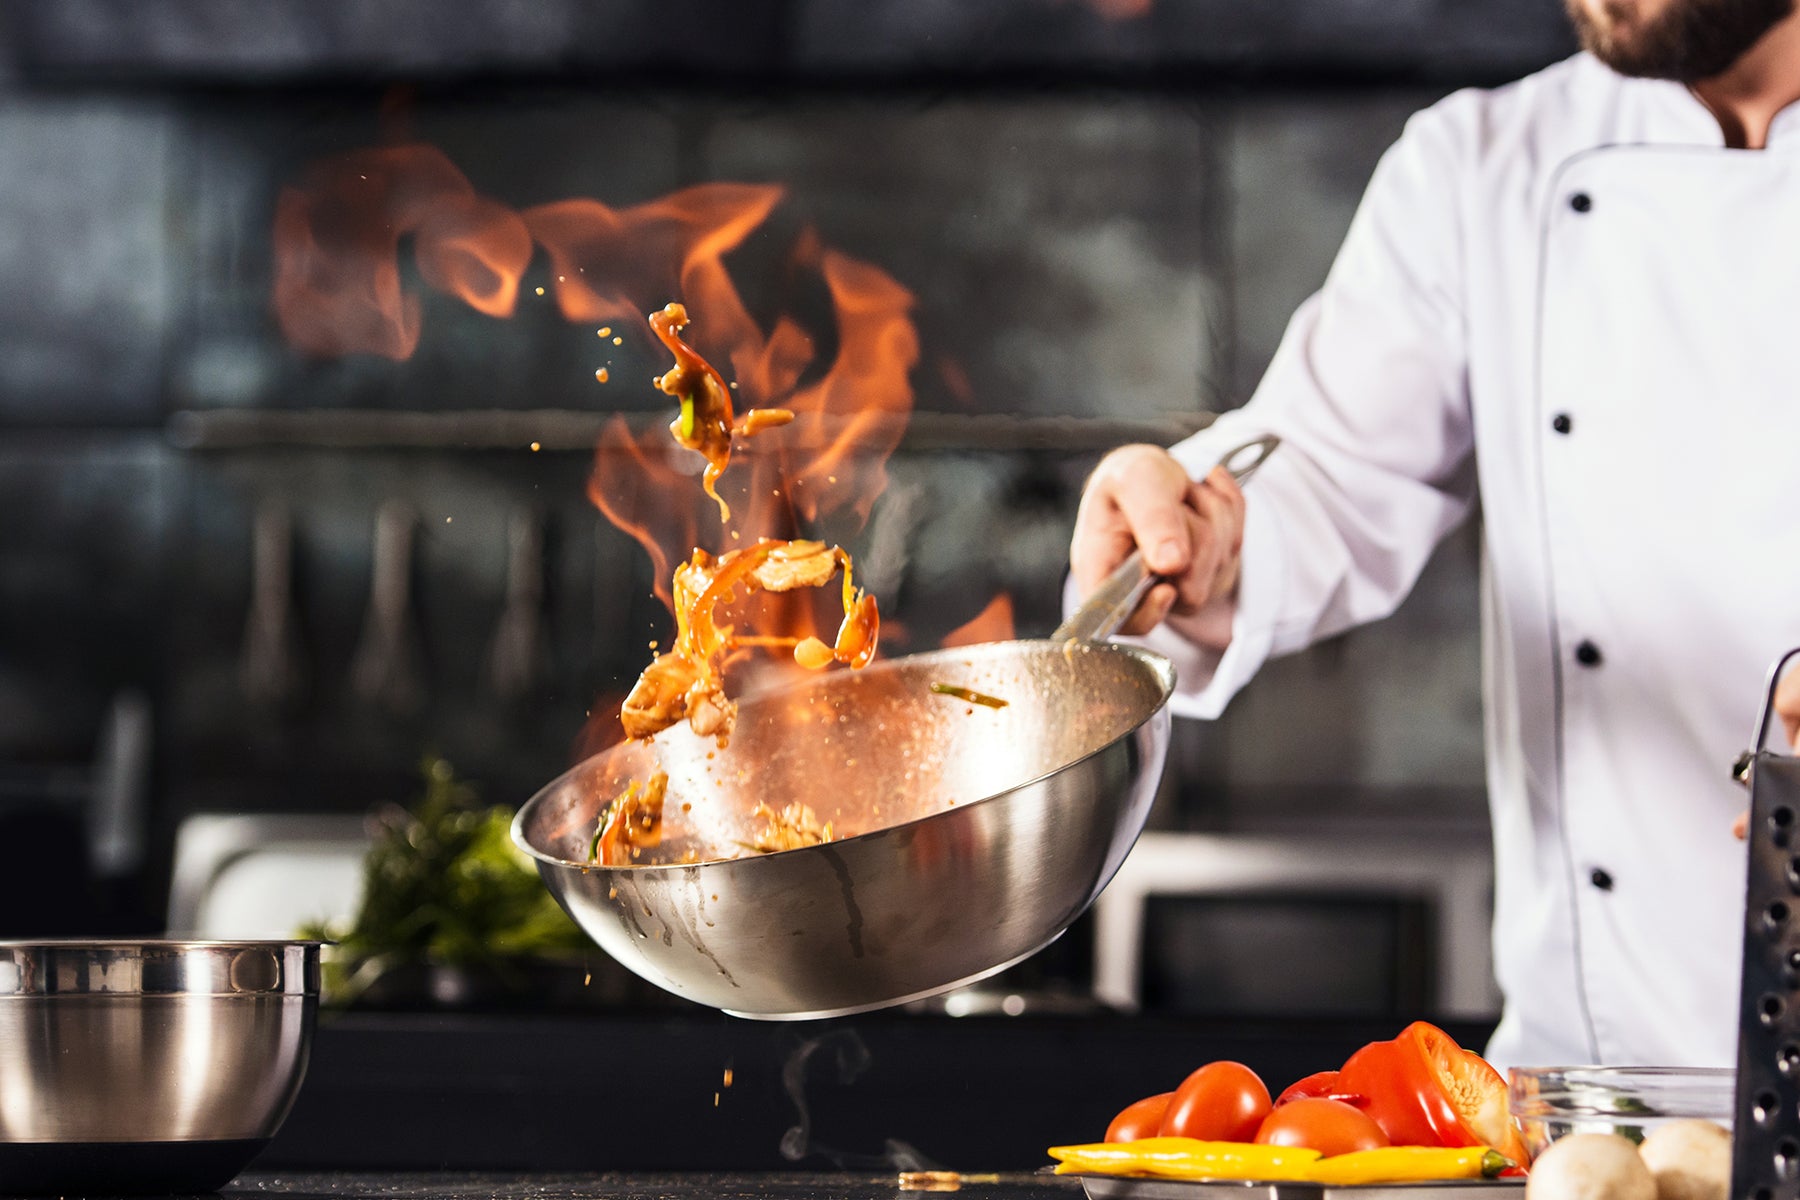 Spicing It Up: Why Professional Chefs Turn Up the Heat